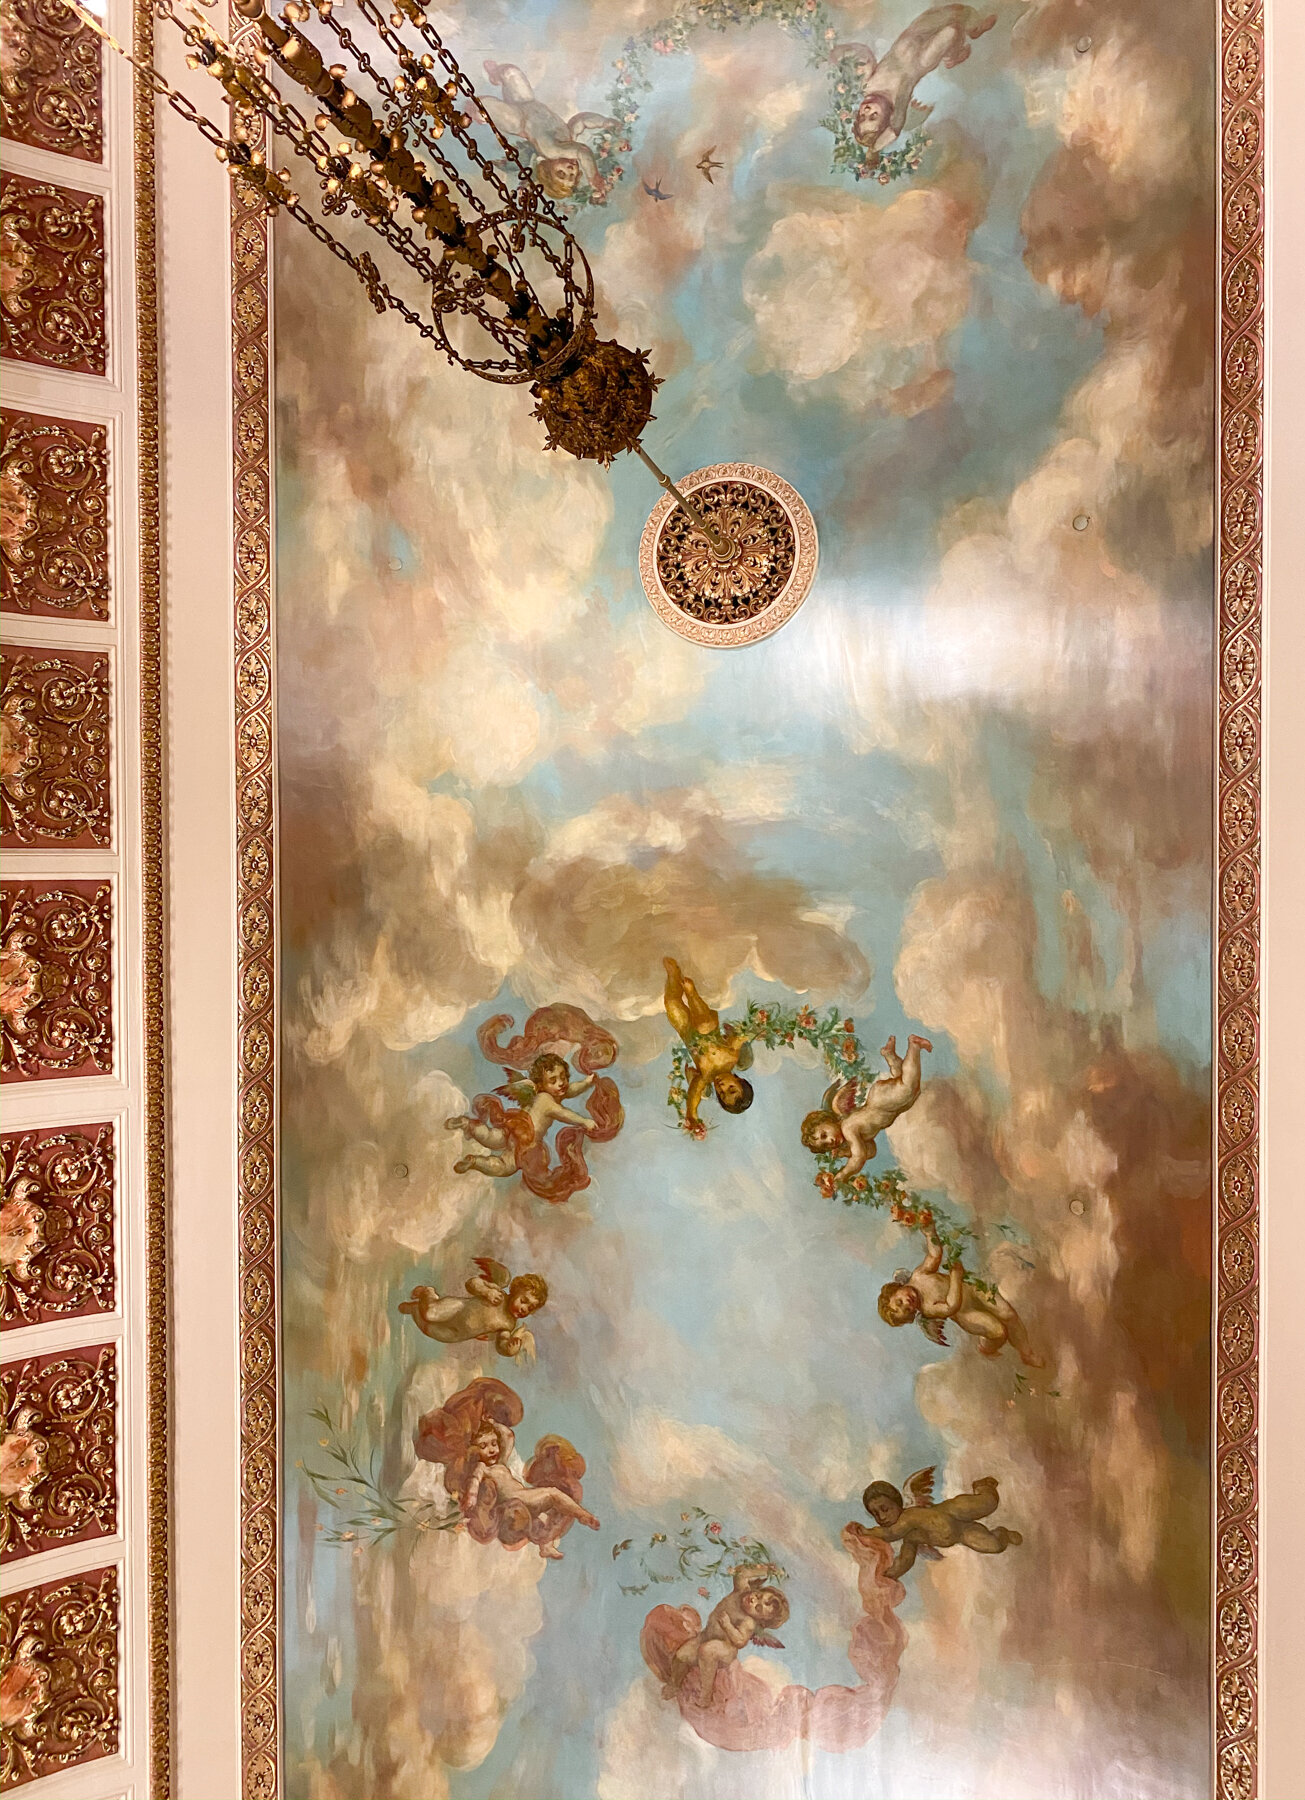 Ceiling Mural at the Pfister Hotel